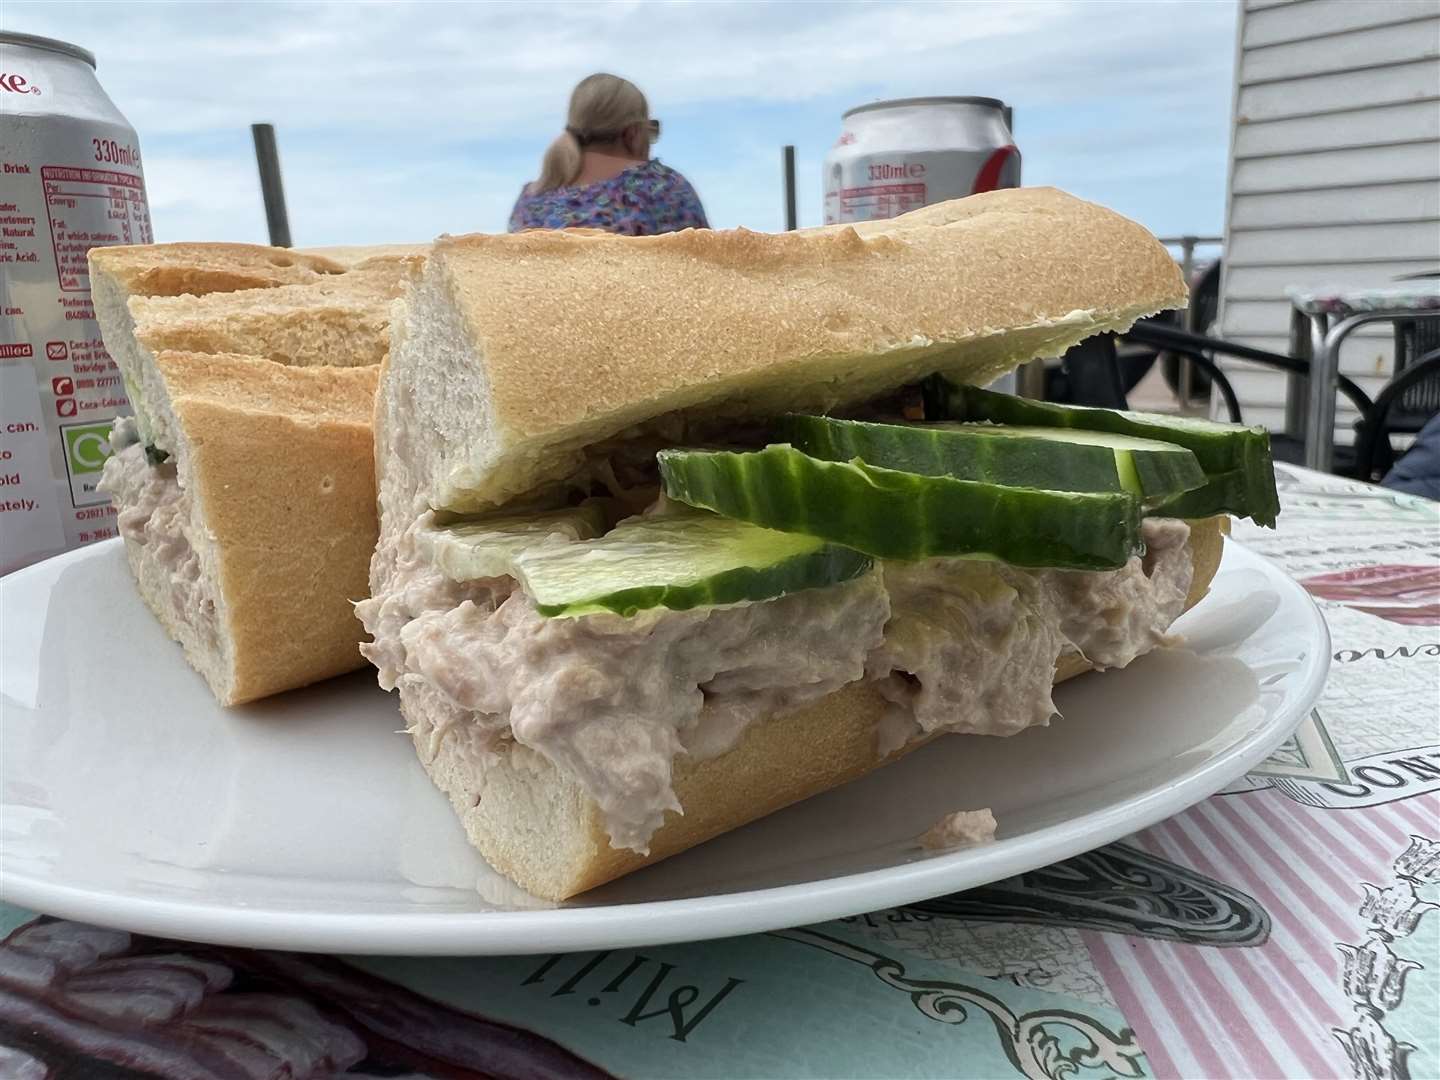 Simple yet tasty - the tuna may and cucumber baguette